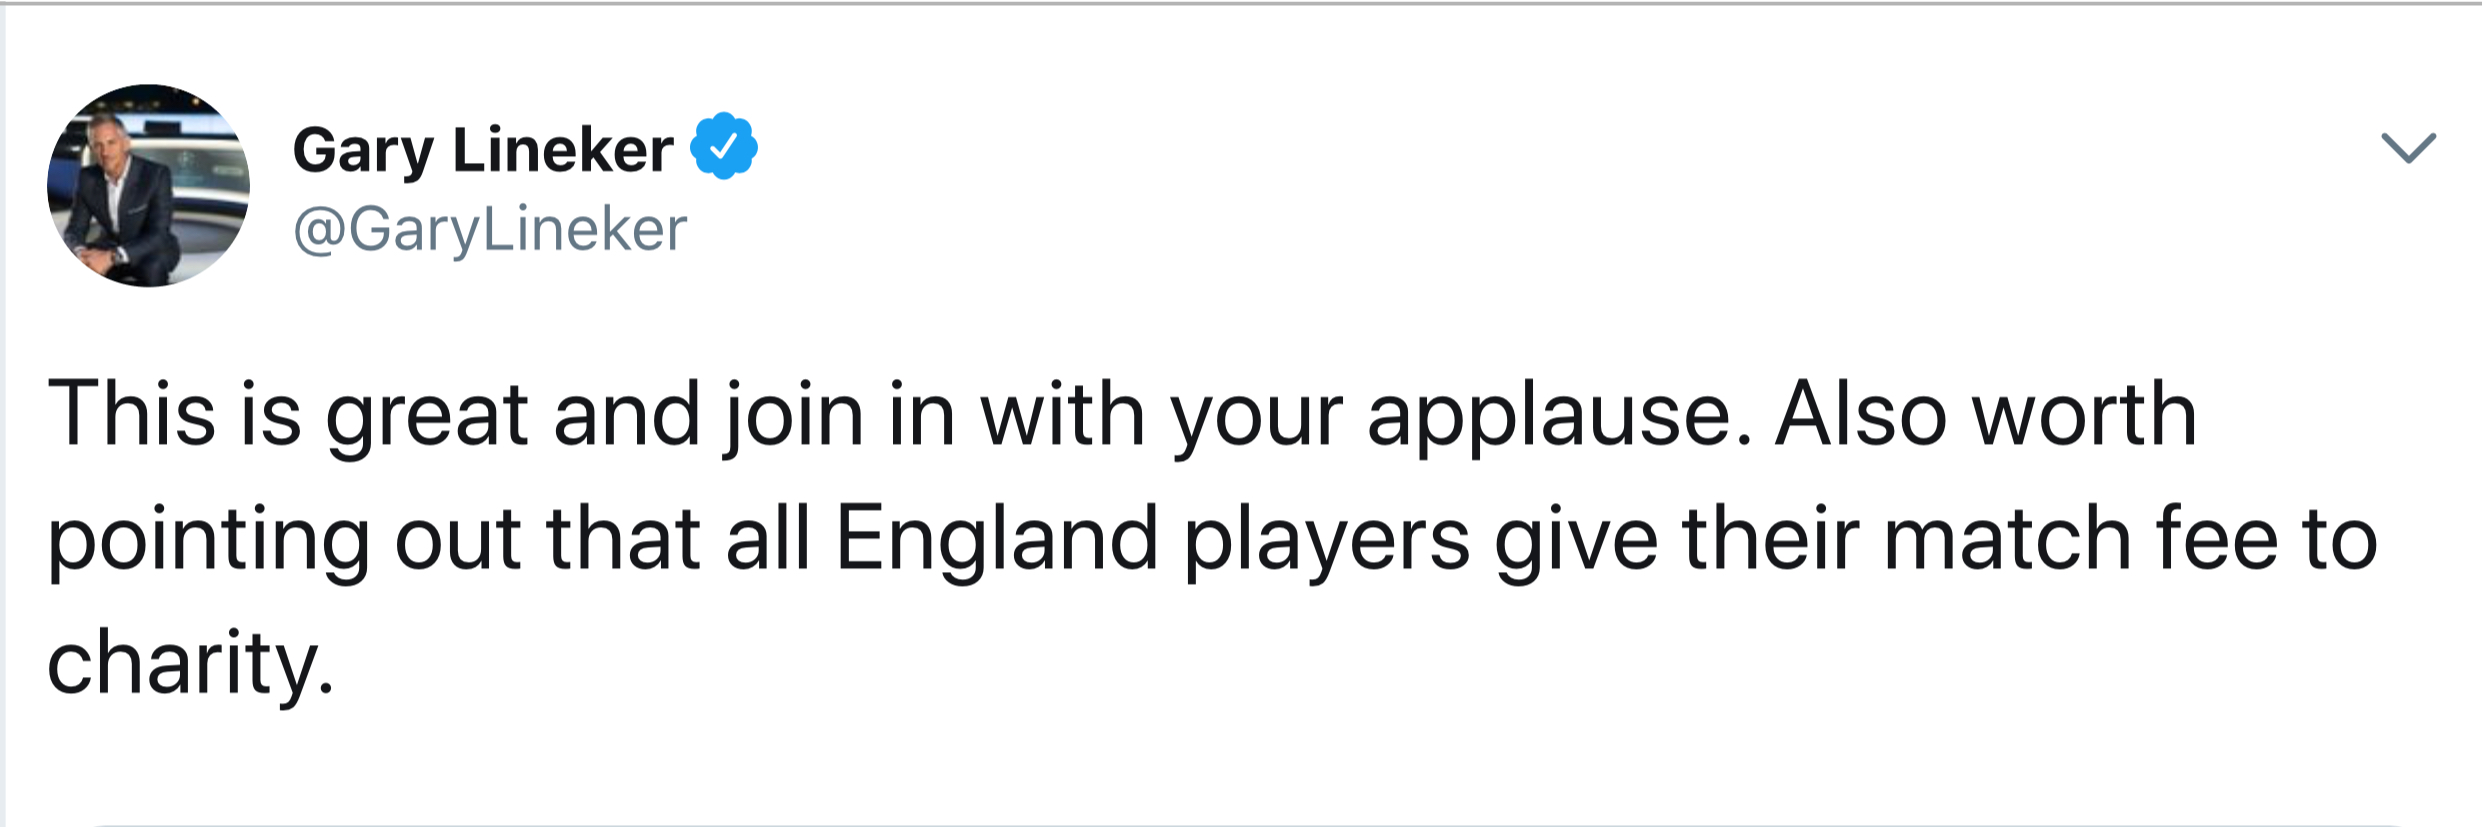 Both Neville and Lineker revealed on Twitter that England's players have been giving their match fees to charity for several years, however this has never been widely reported.